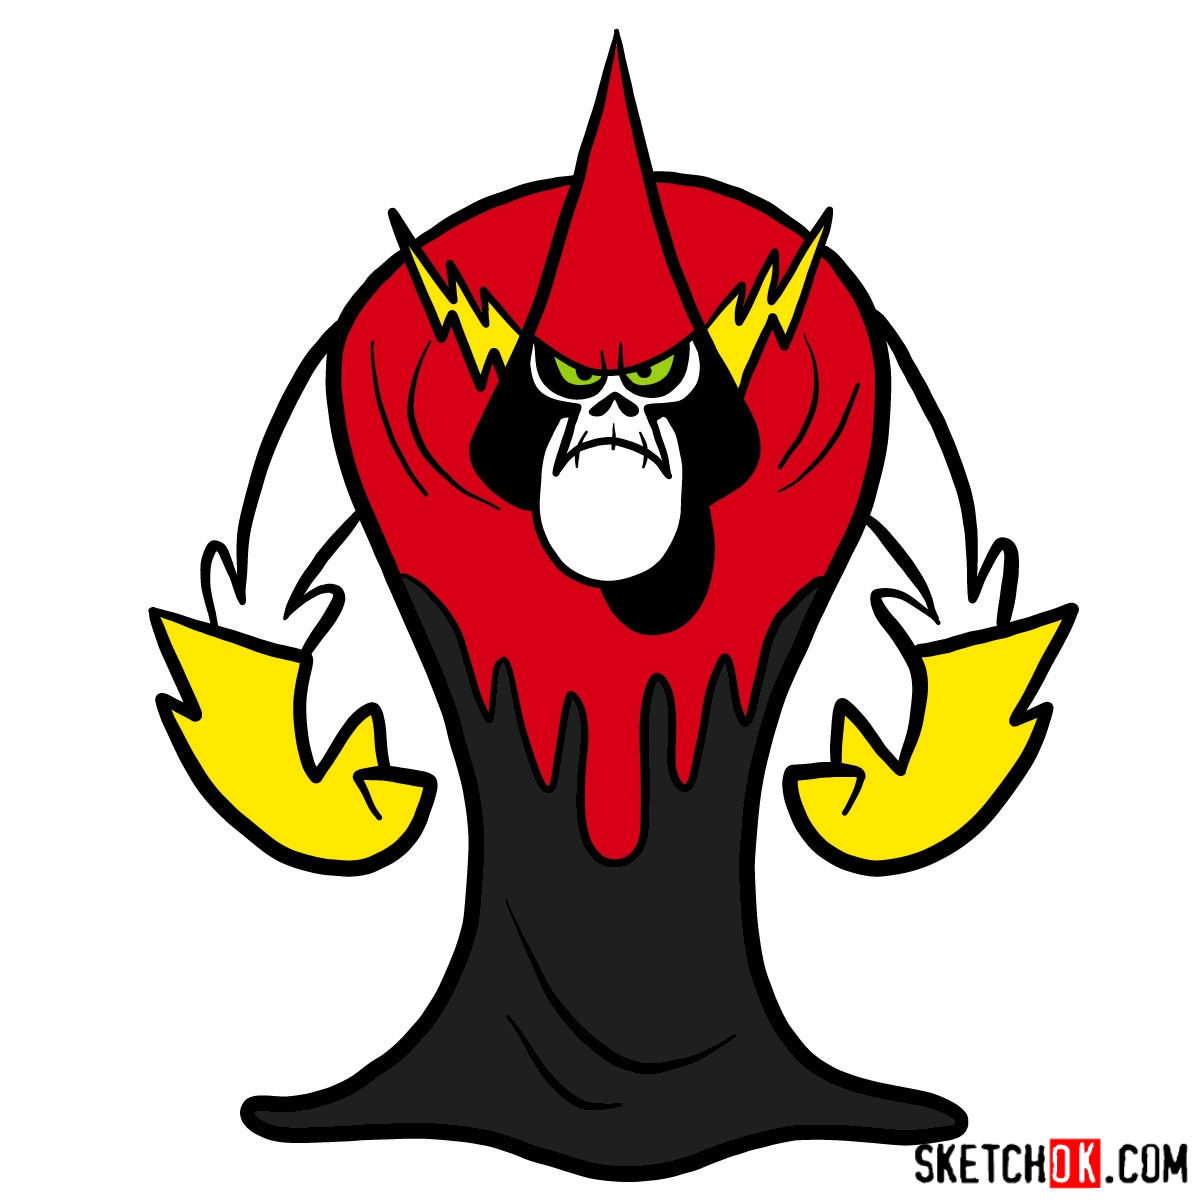 How to draw Lord Hater from Wander Over Yonder